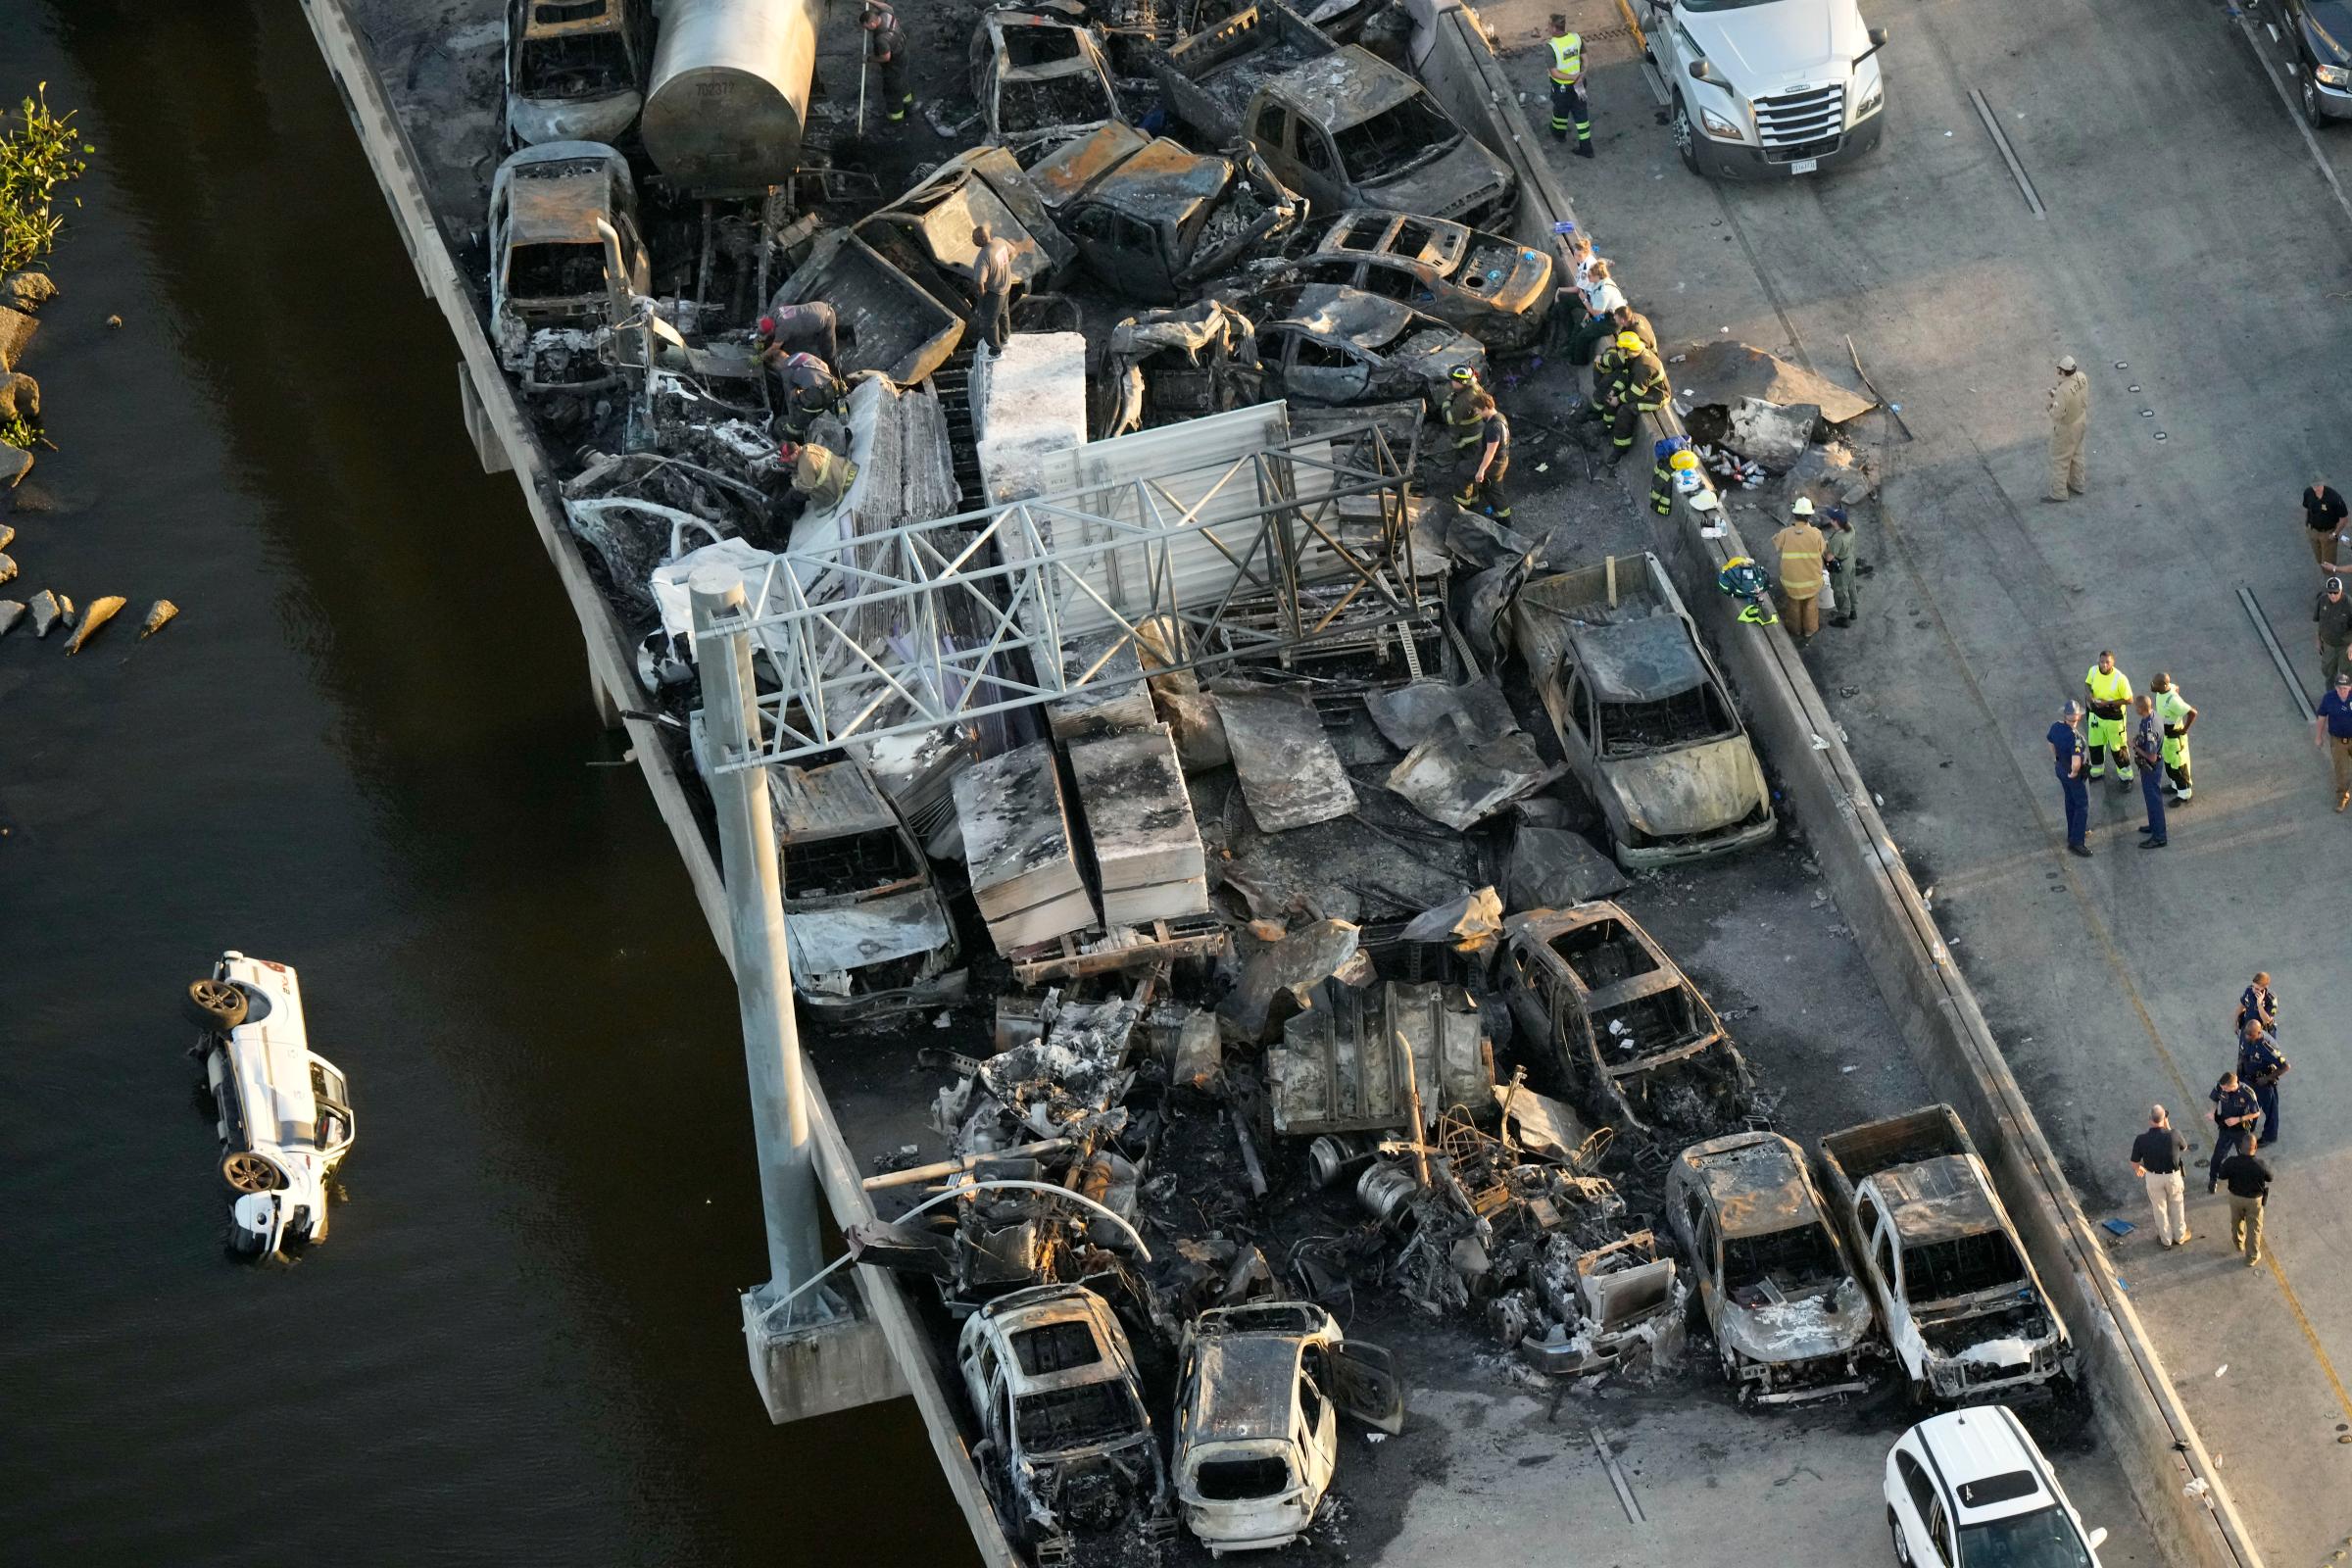 In this aerial photo, responders are seen near wreckage in the aftermath of a multi-vehicle pileup caused by "superfog" on I-55 in Manchac, La., Oct. 23.